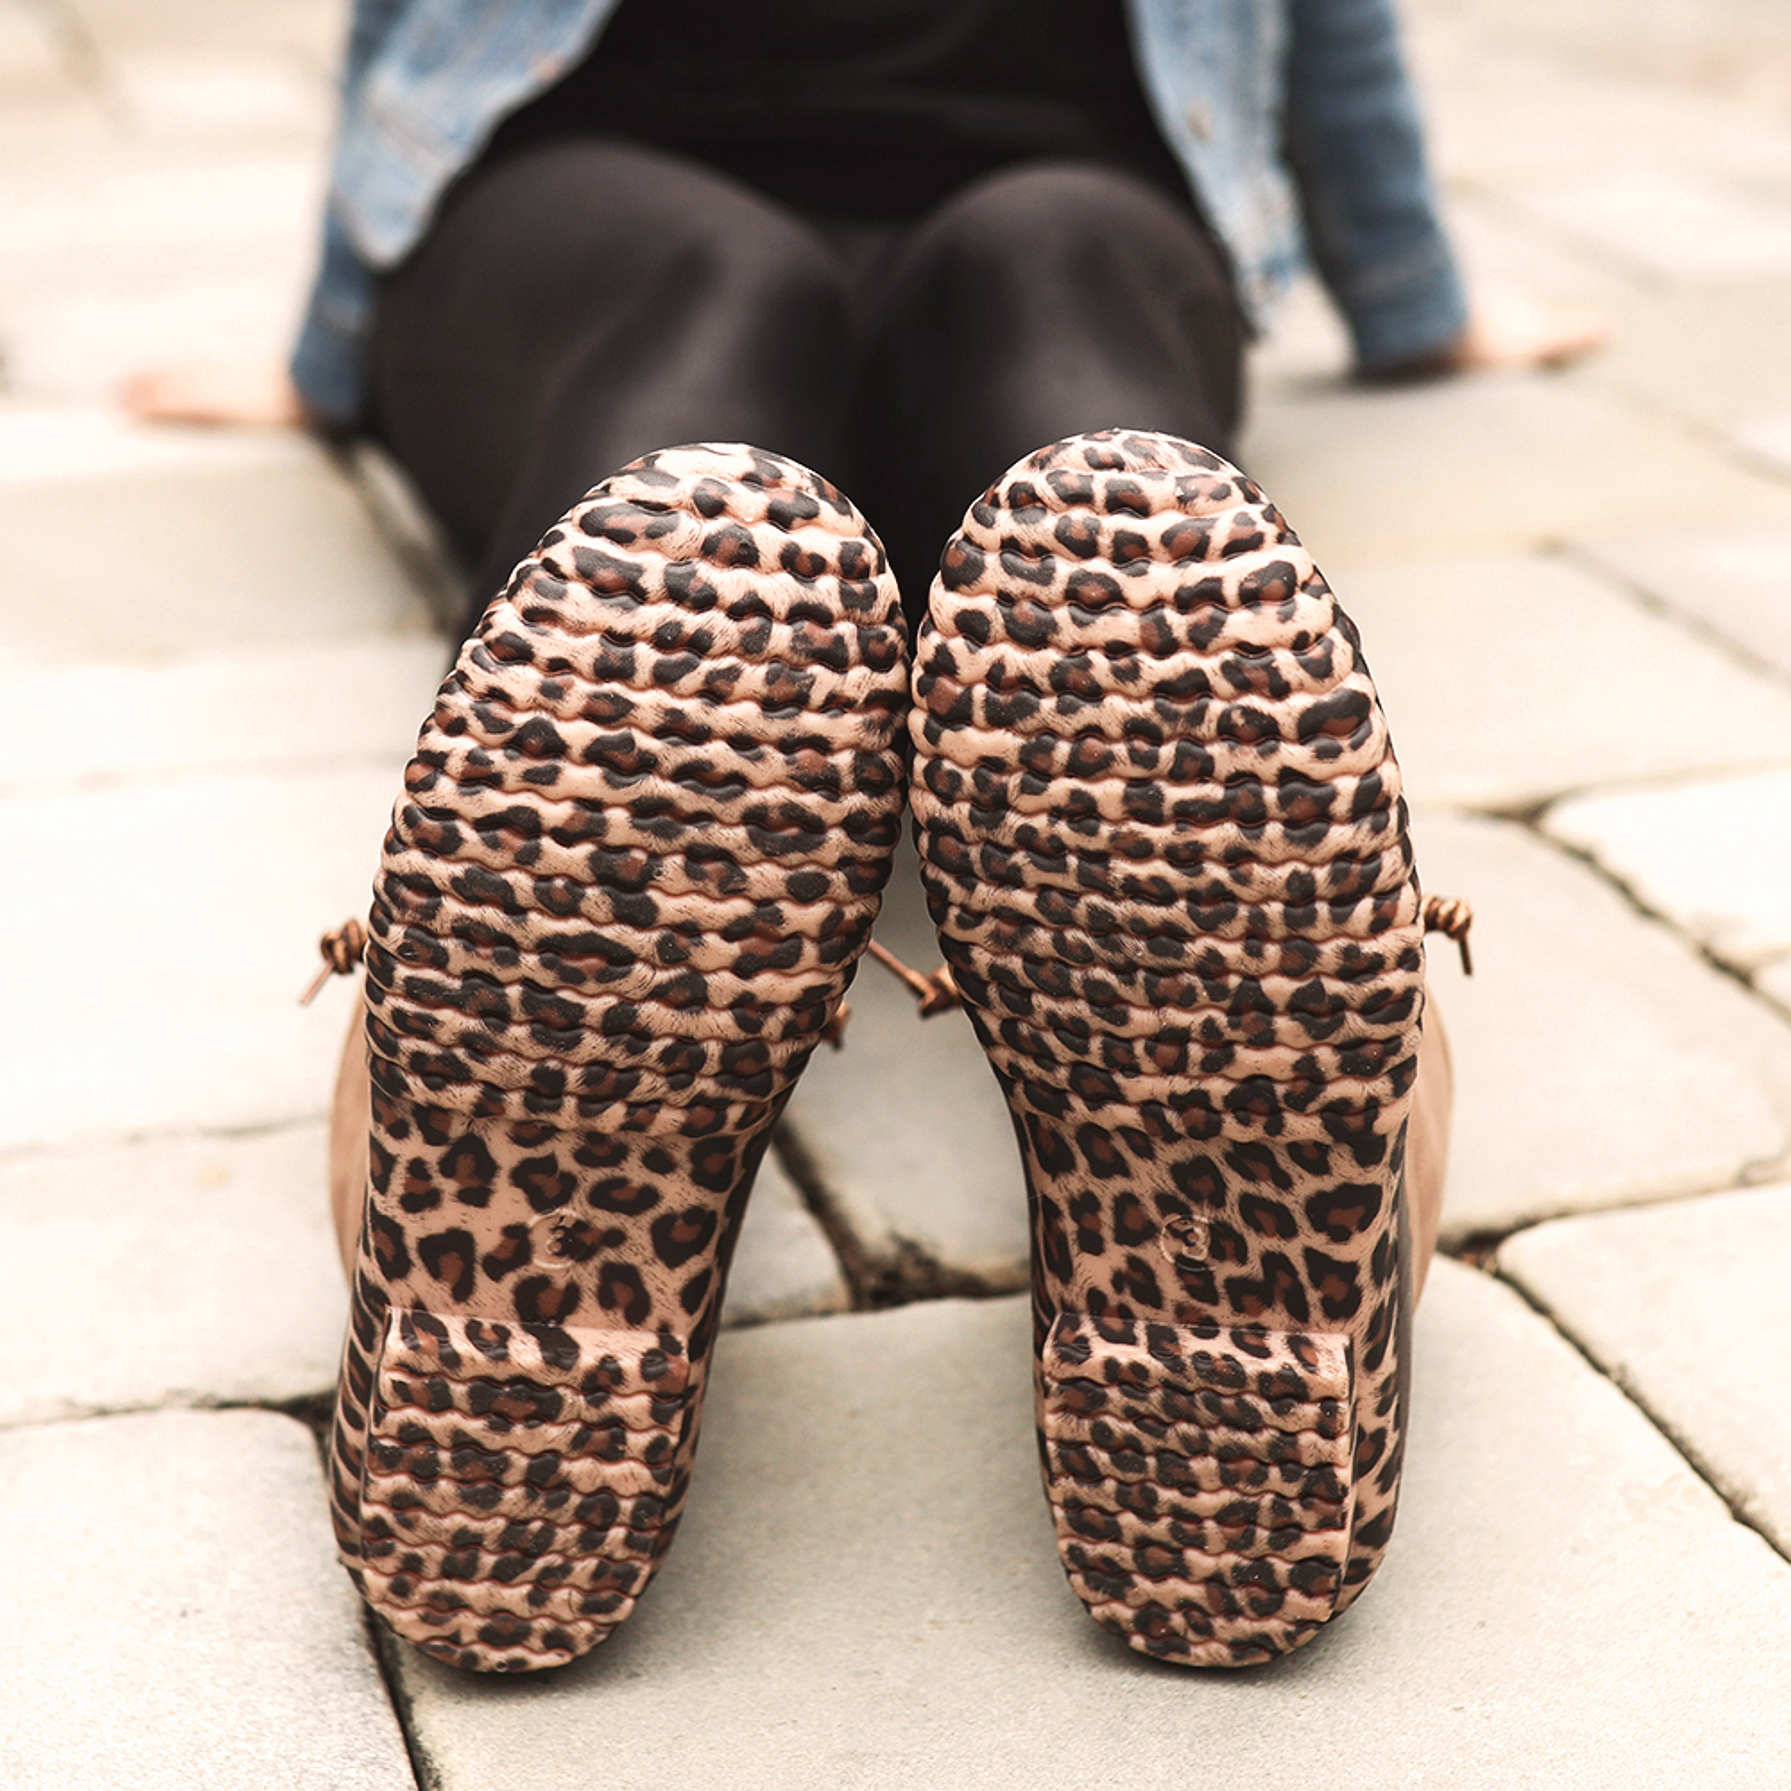 Personalized Leopard Bottom Print Duck Boots - Marleylilly